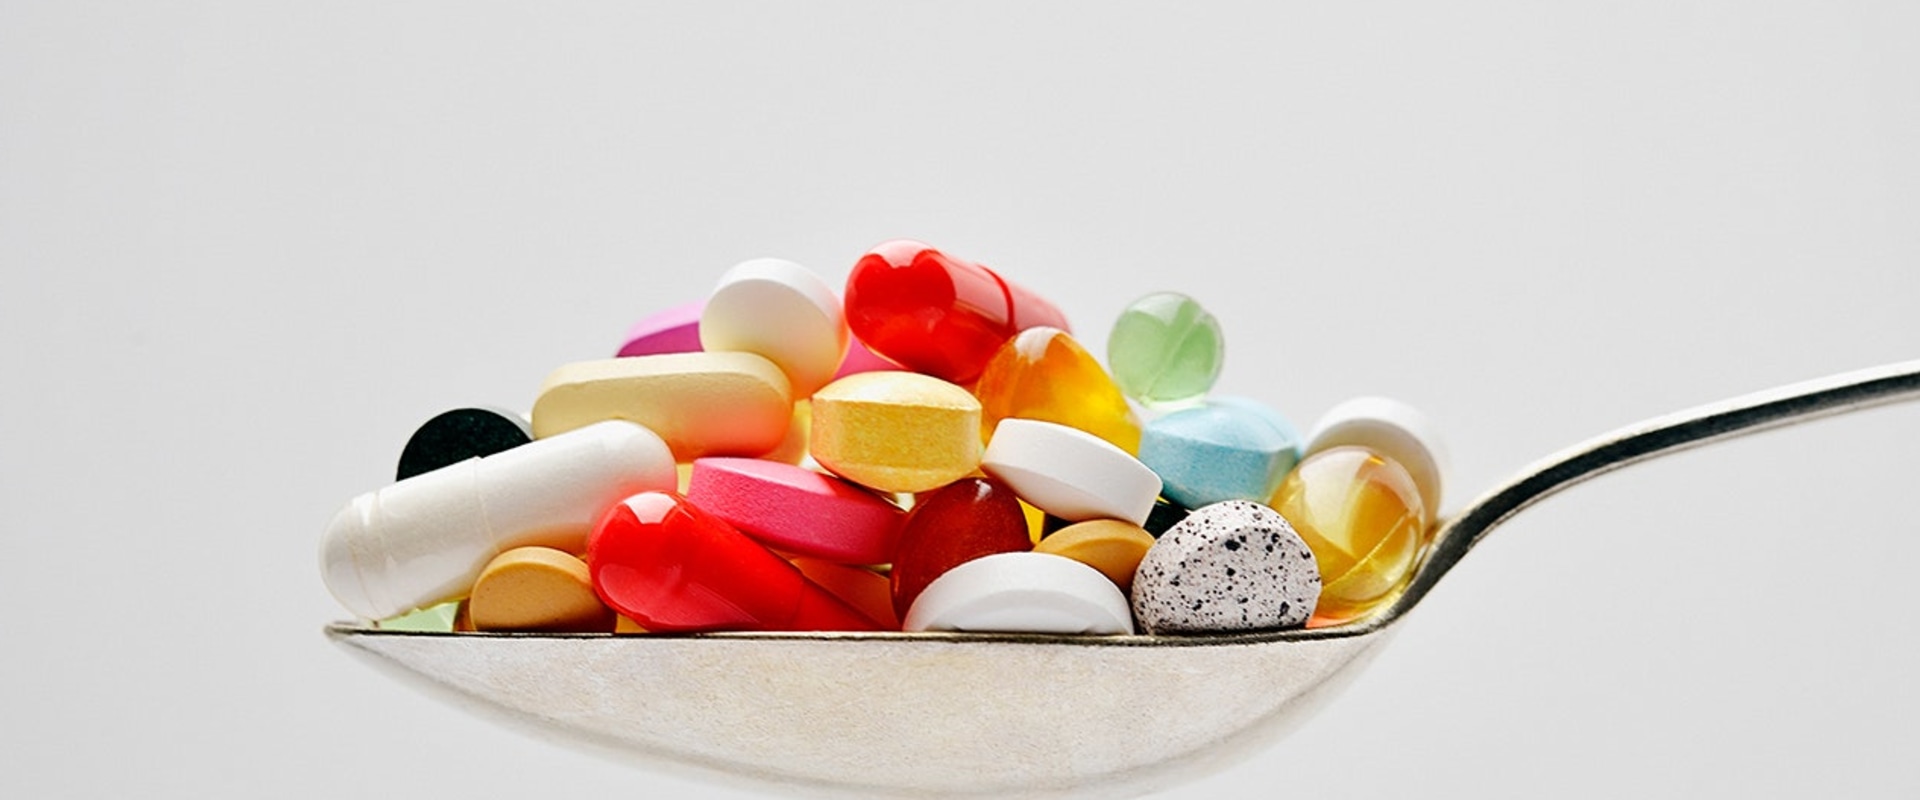 Can Dietary Supplements Interact Negatively with Other Substances?